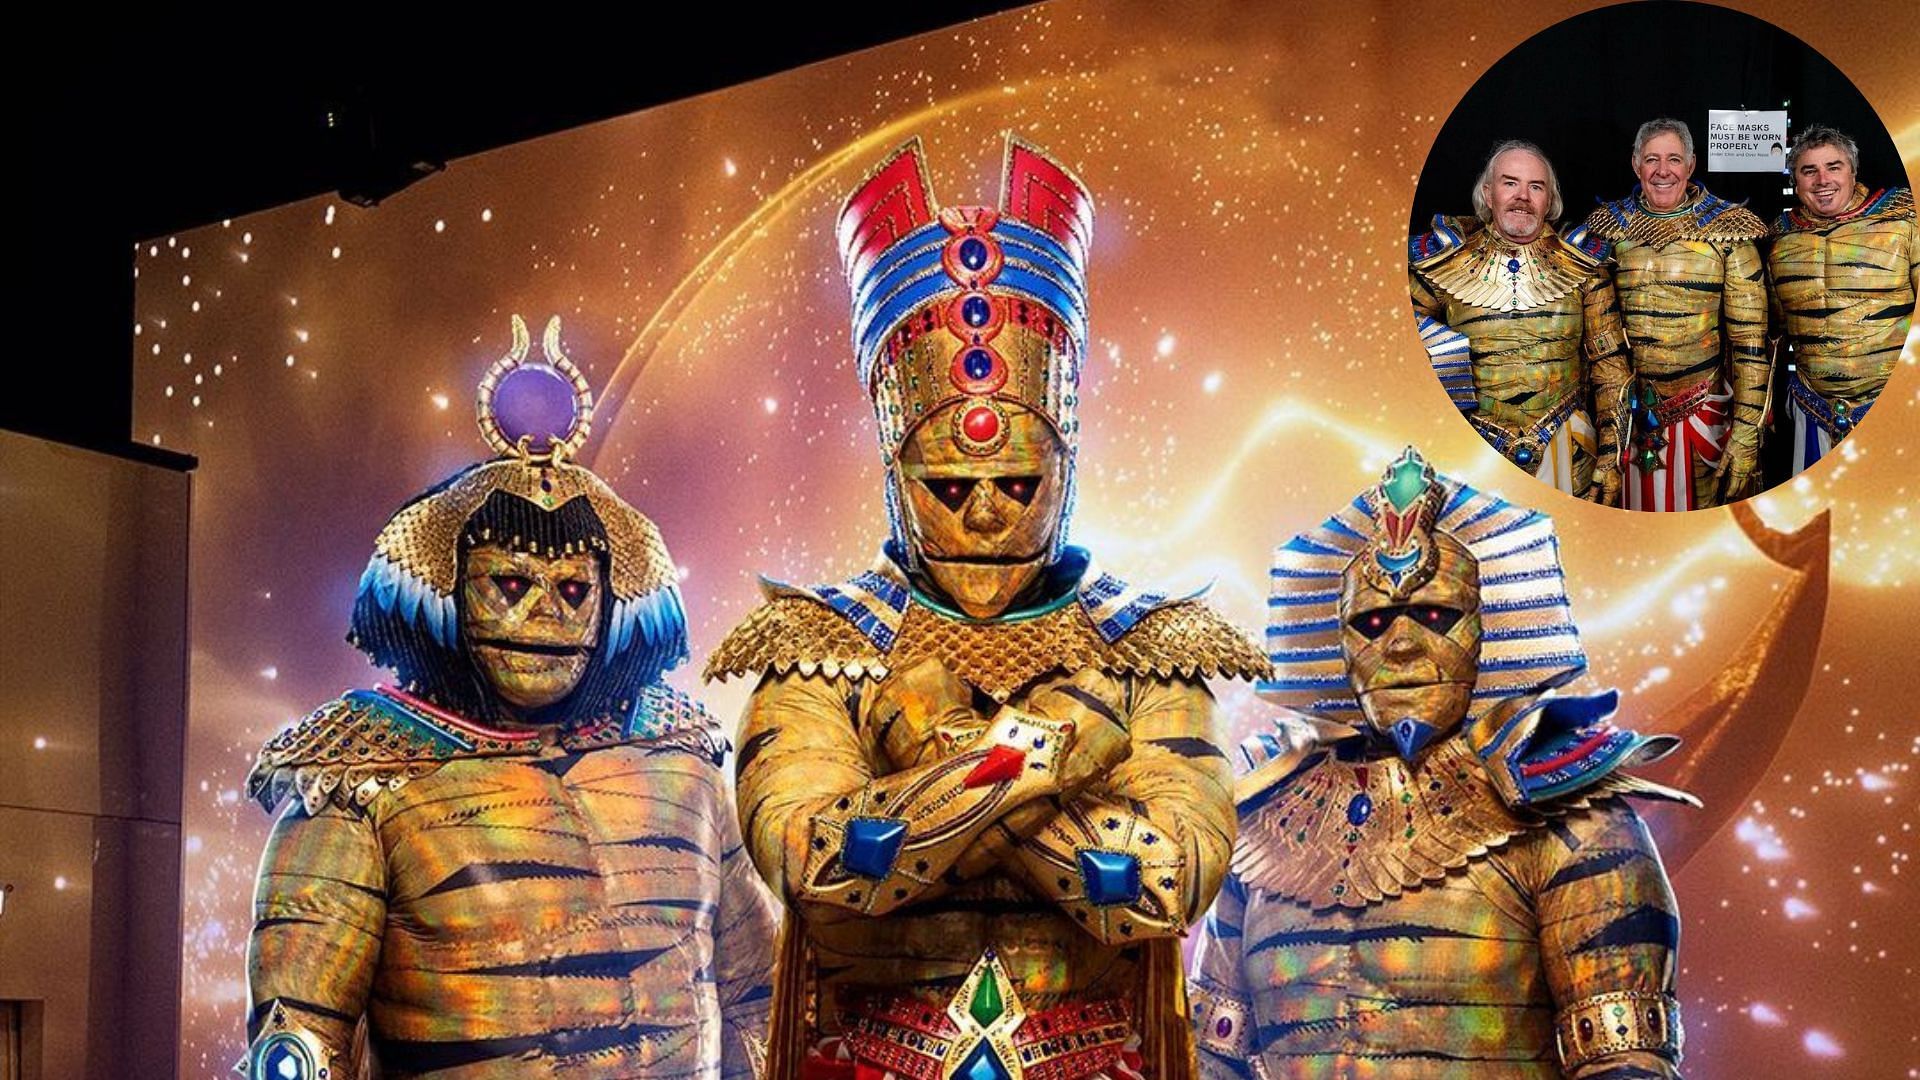 The Mummies from The Masked Singer (Image via Instagram/@maskedsingerfox)